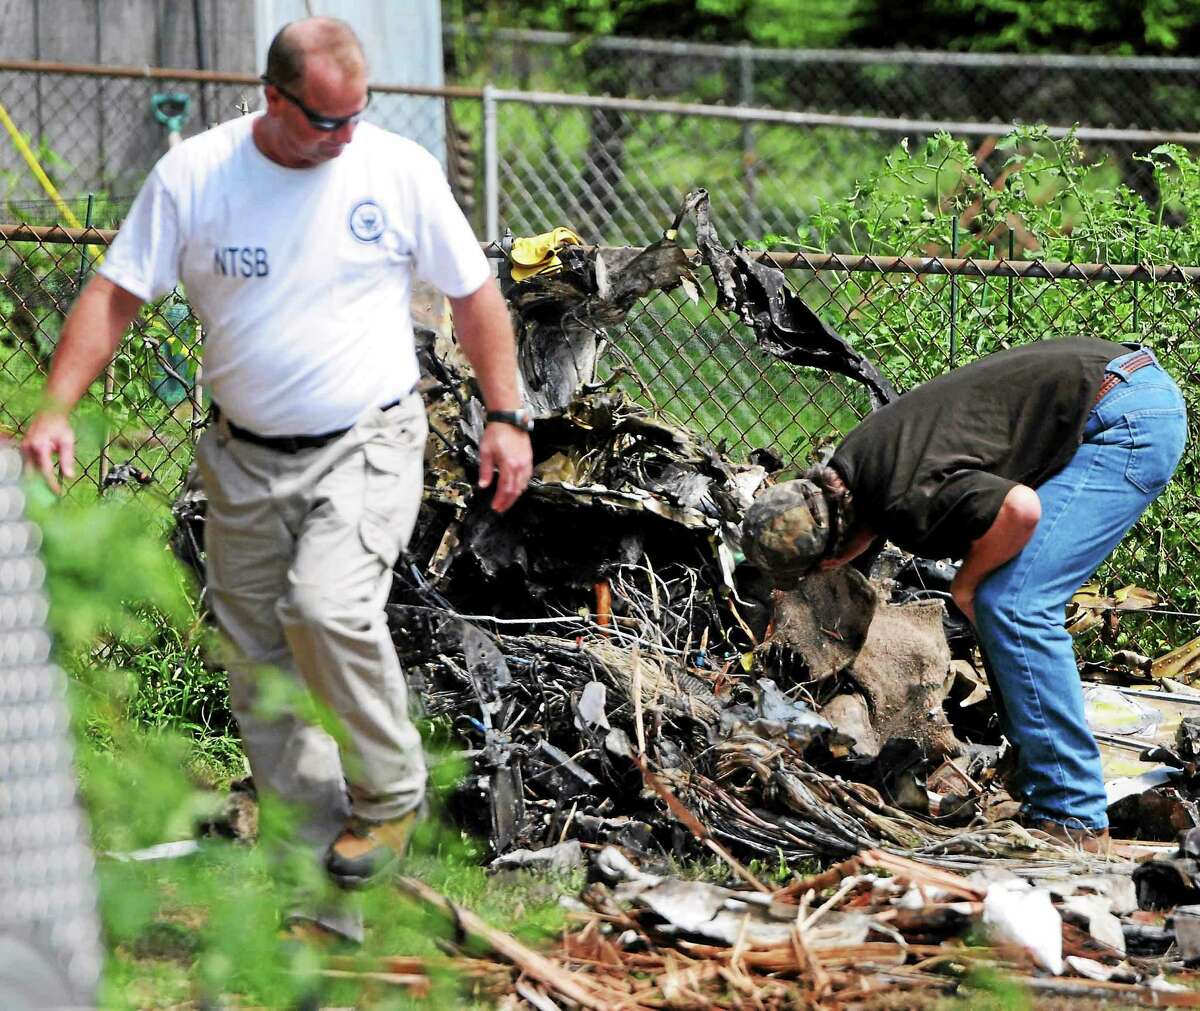 NTSB investigators and recovery team at scene Saturday August 10, 2013 of the plane crash that hit two houses Friday afternoon, August 9. 2013 at 64 and 68 Charter Oak Avenue between James and Gordon Streets in East Haven, Connecticut.